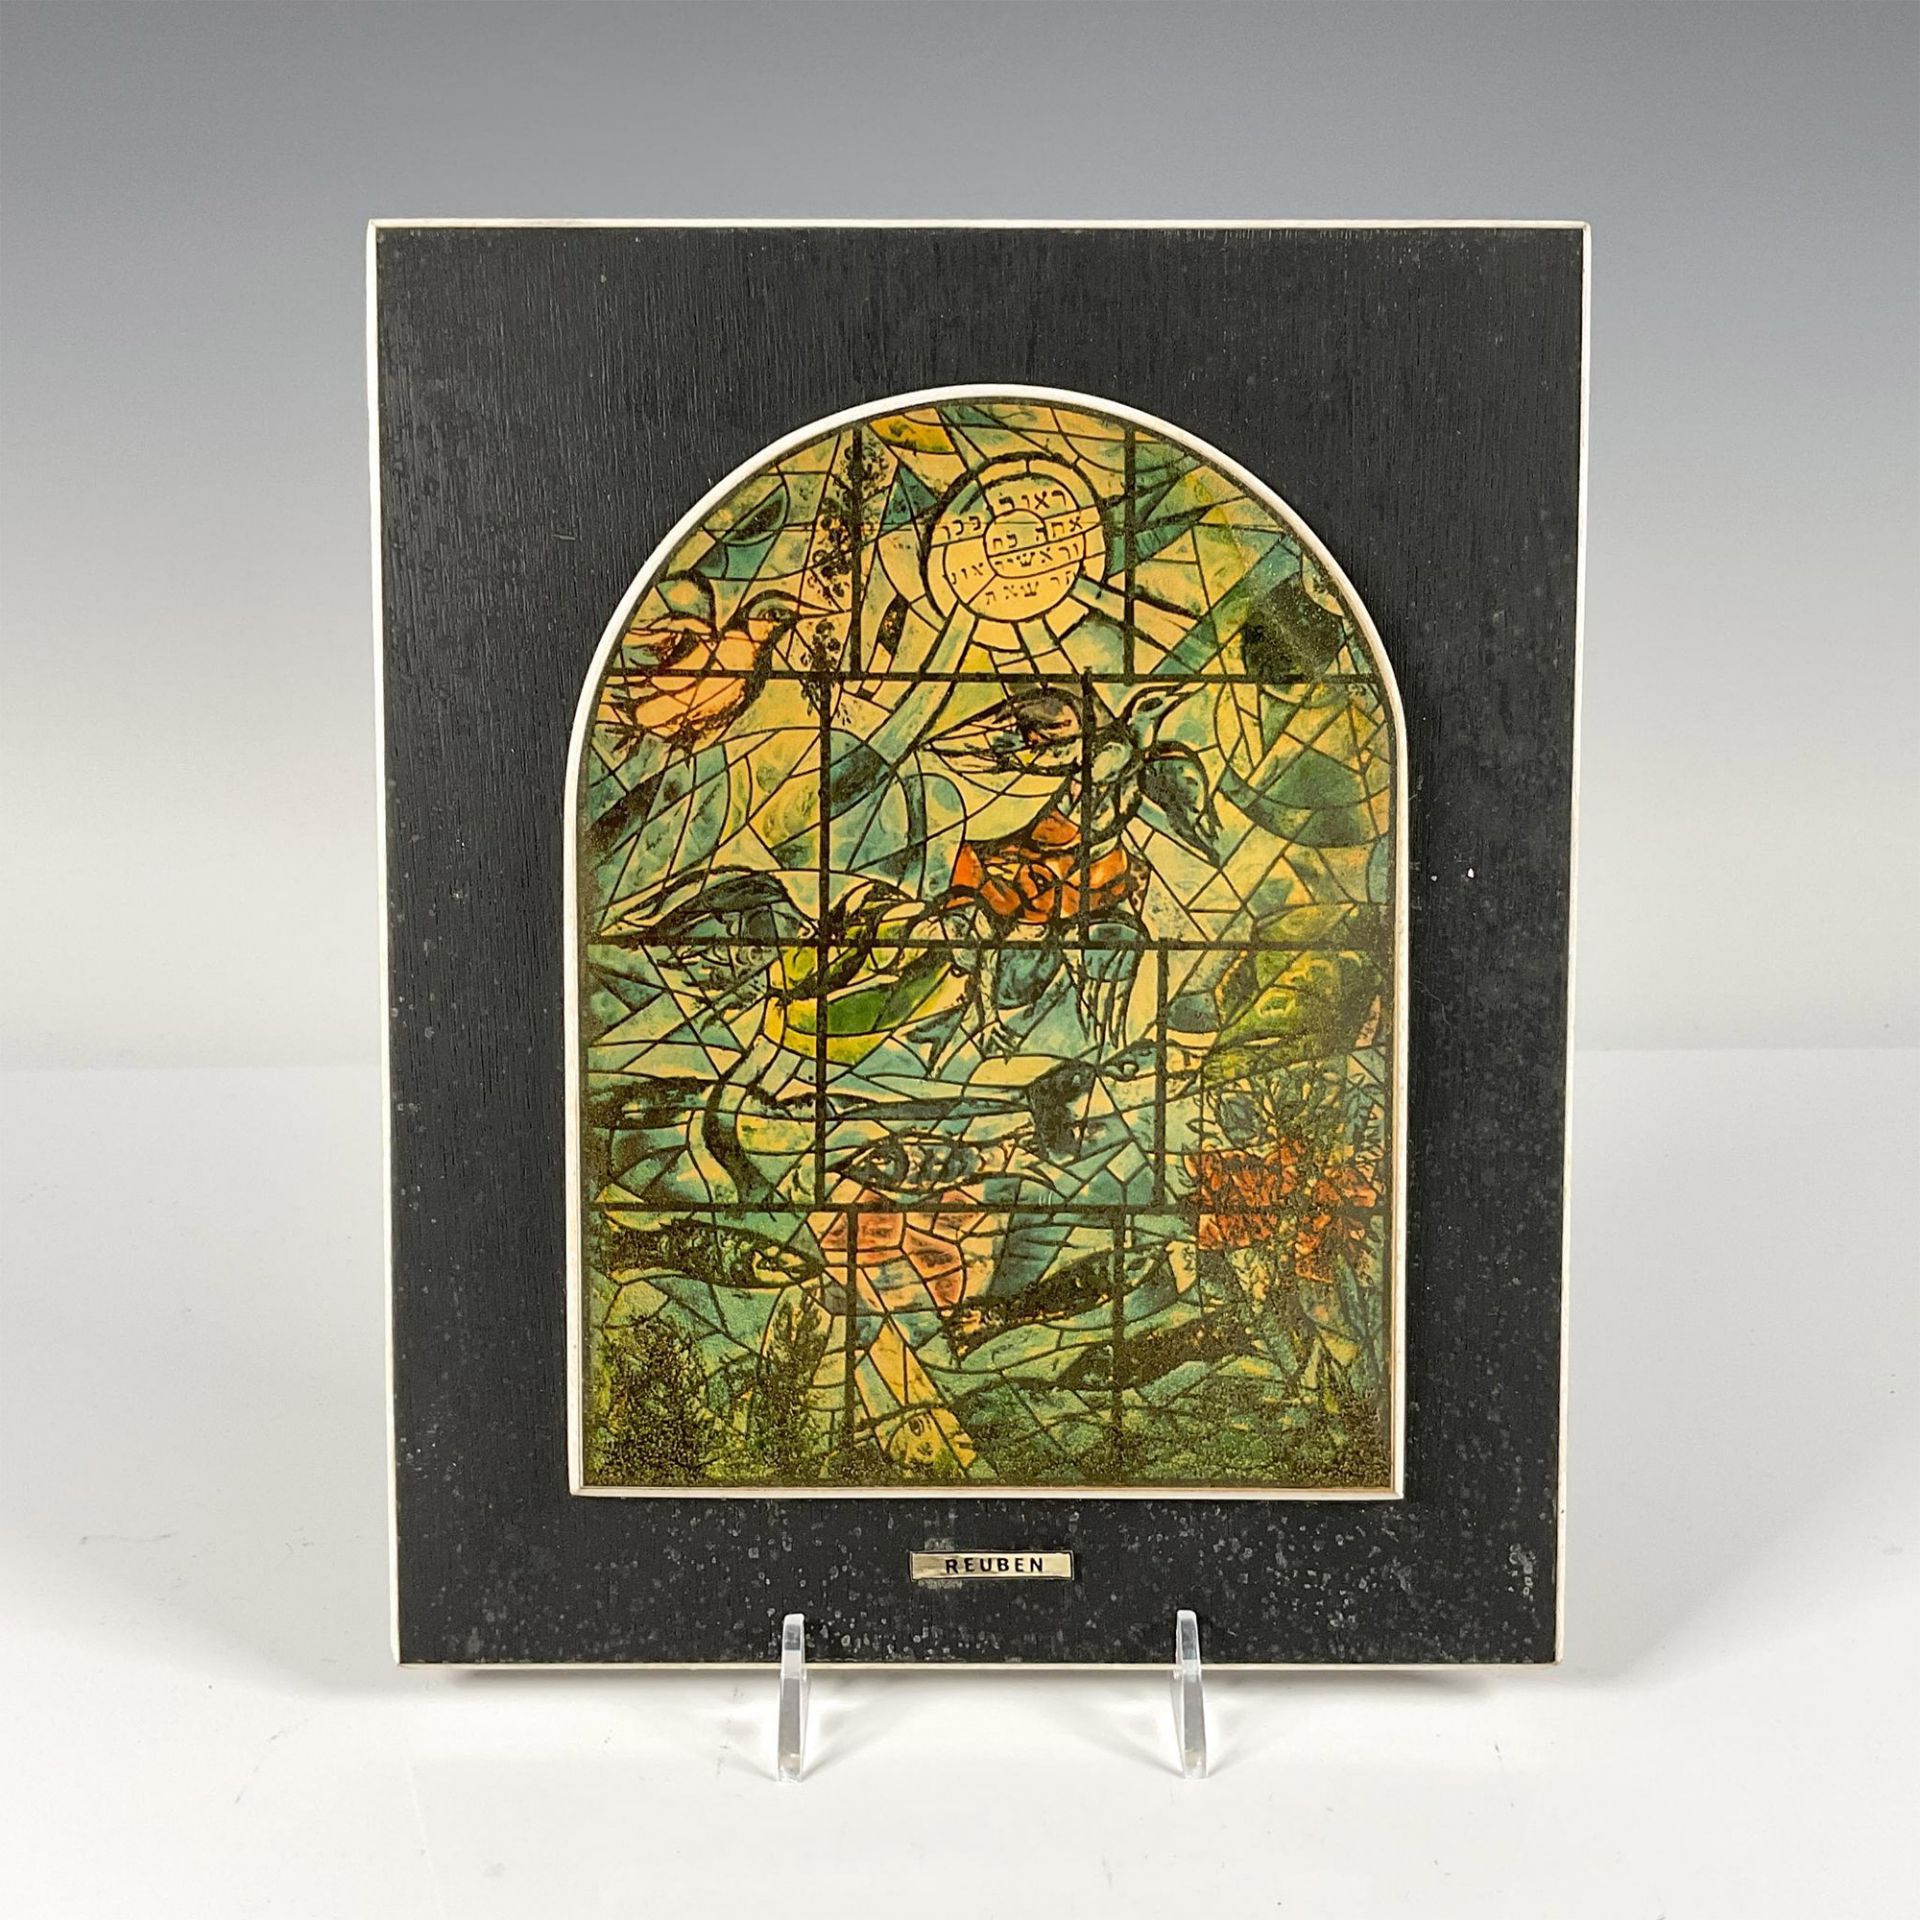 13pc After Marc Chagall by Avissar Wooden Plaques, The 12 Stained Glass Windows - Image 3 of 20